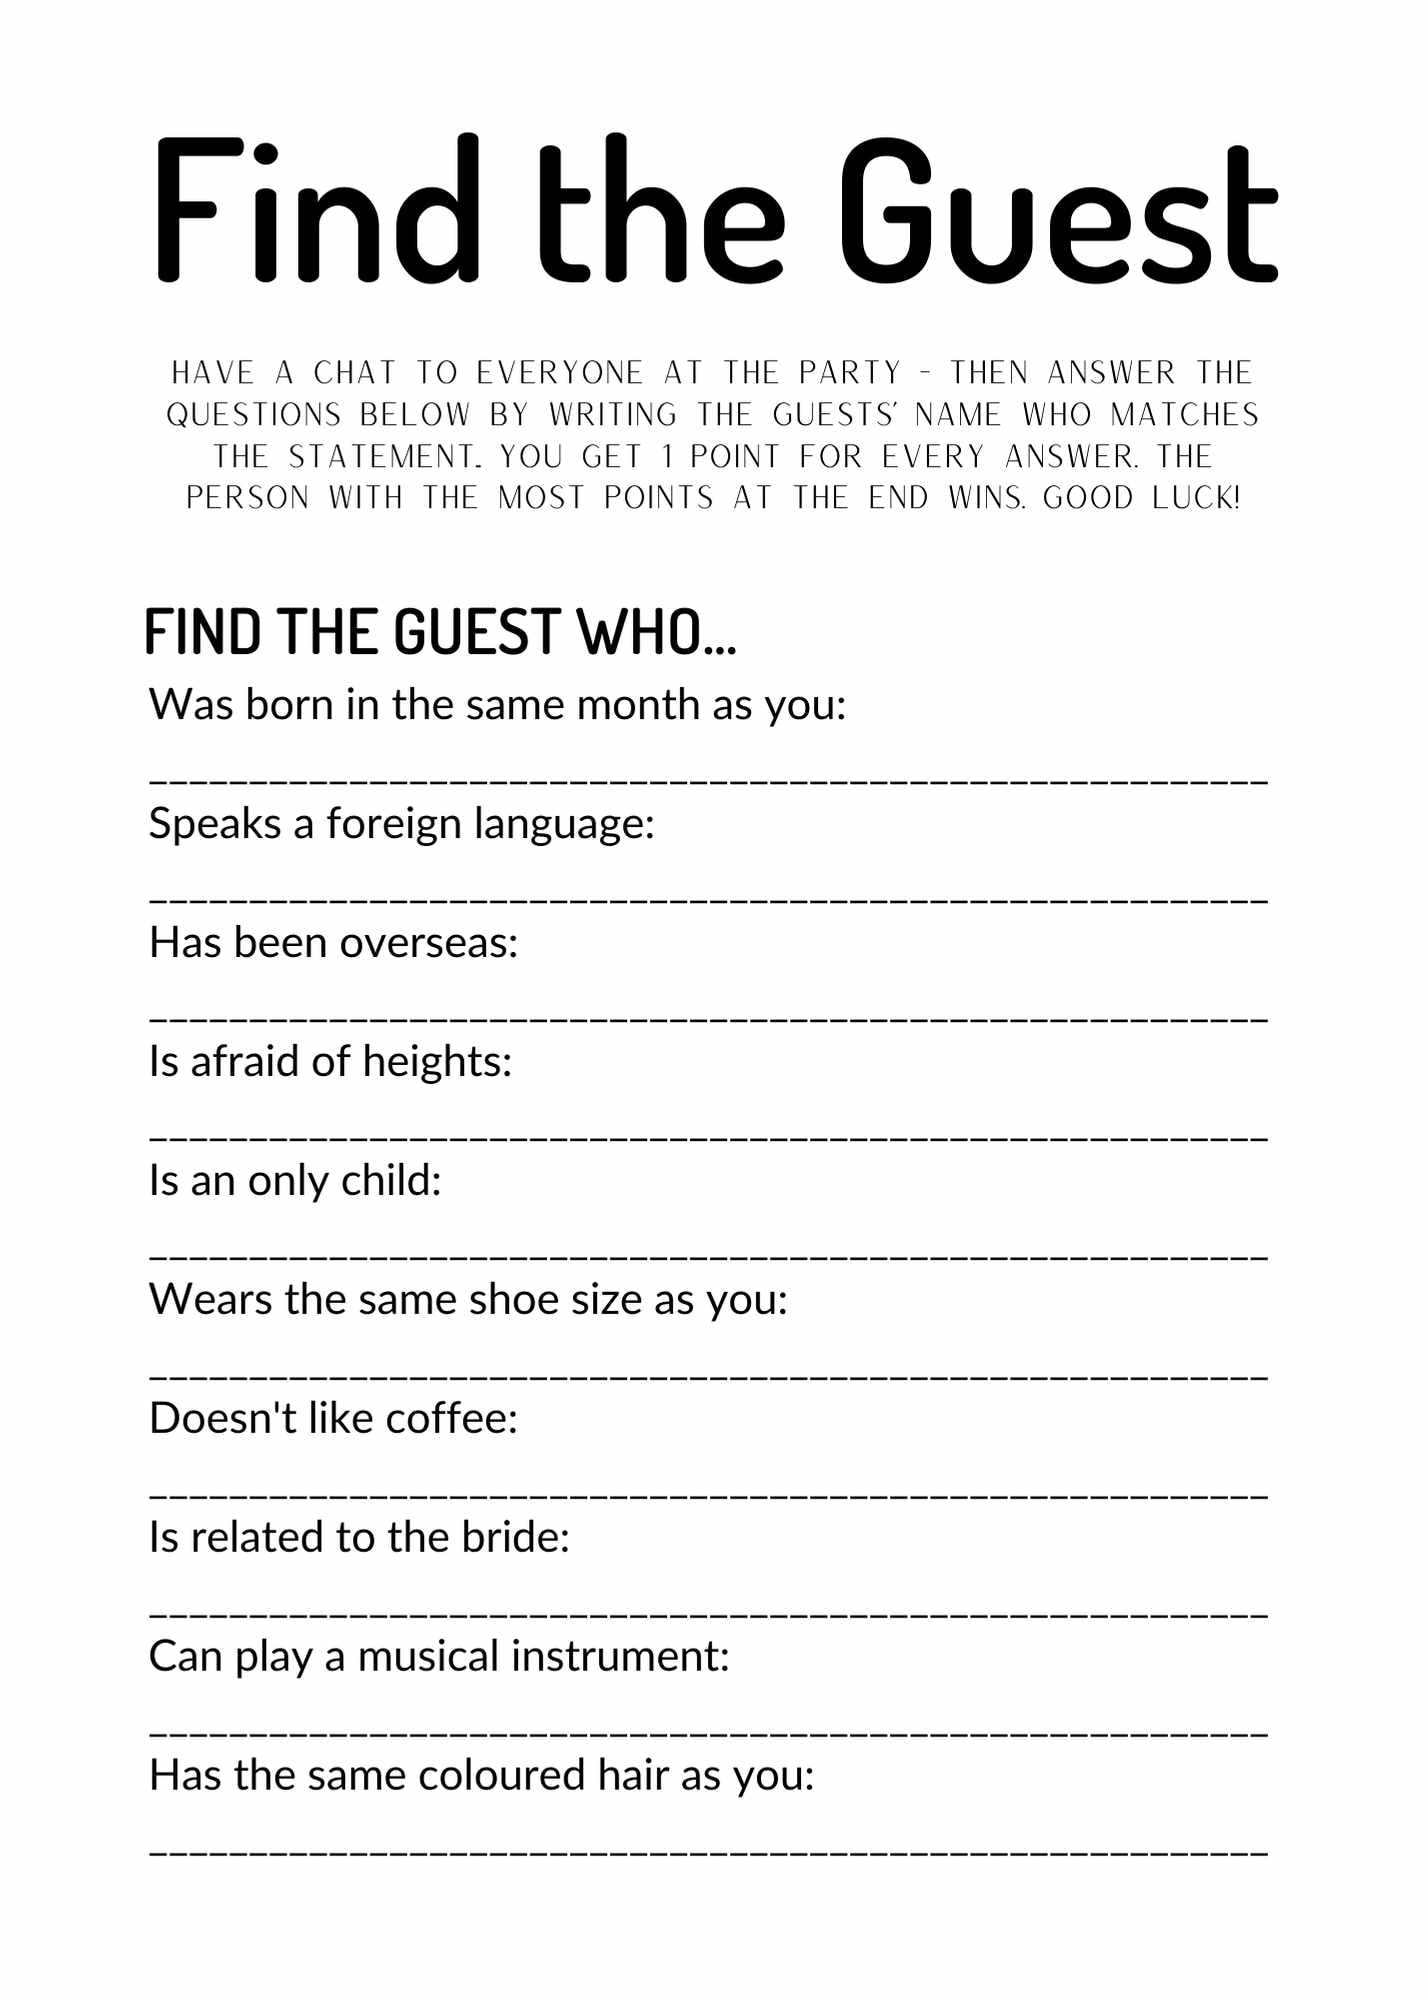 find-the-guest-game-free-printable